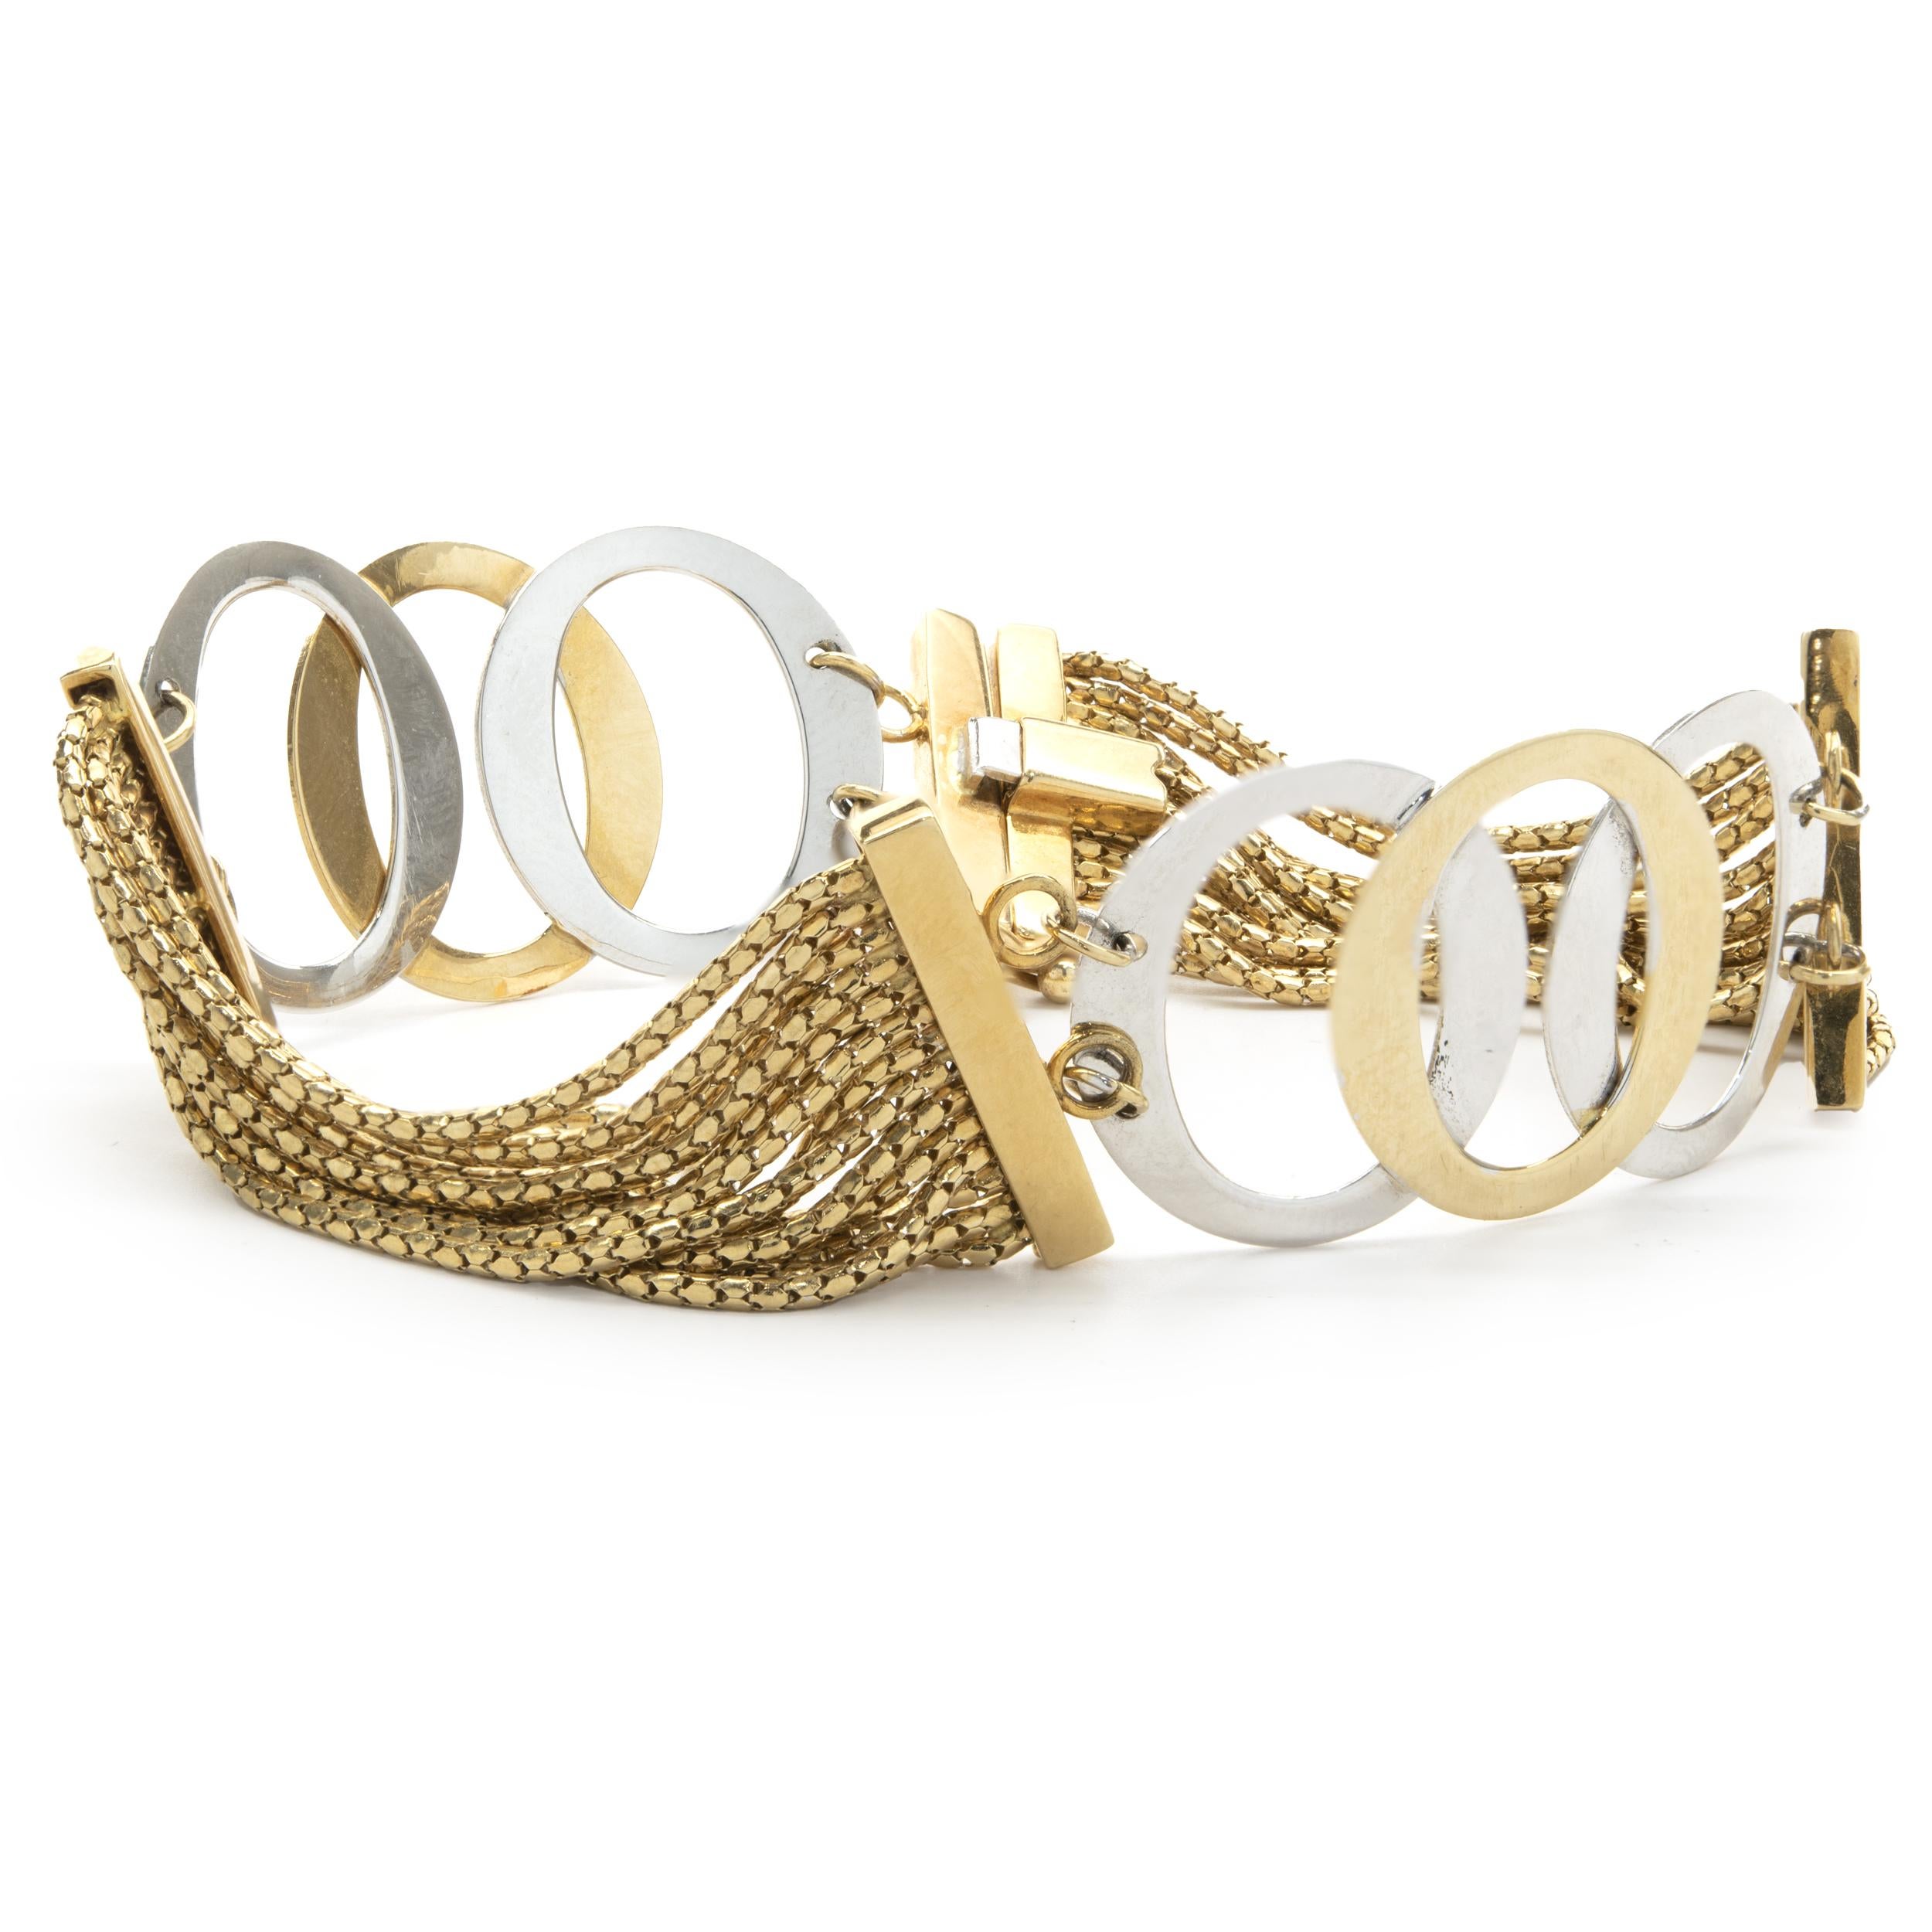 Material: 14K yellow & white gold
Dimensions: bracelet measures 7.25-inches
Weight: 17.01 grams
